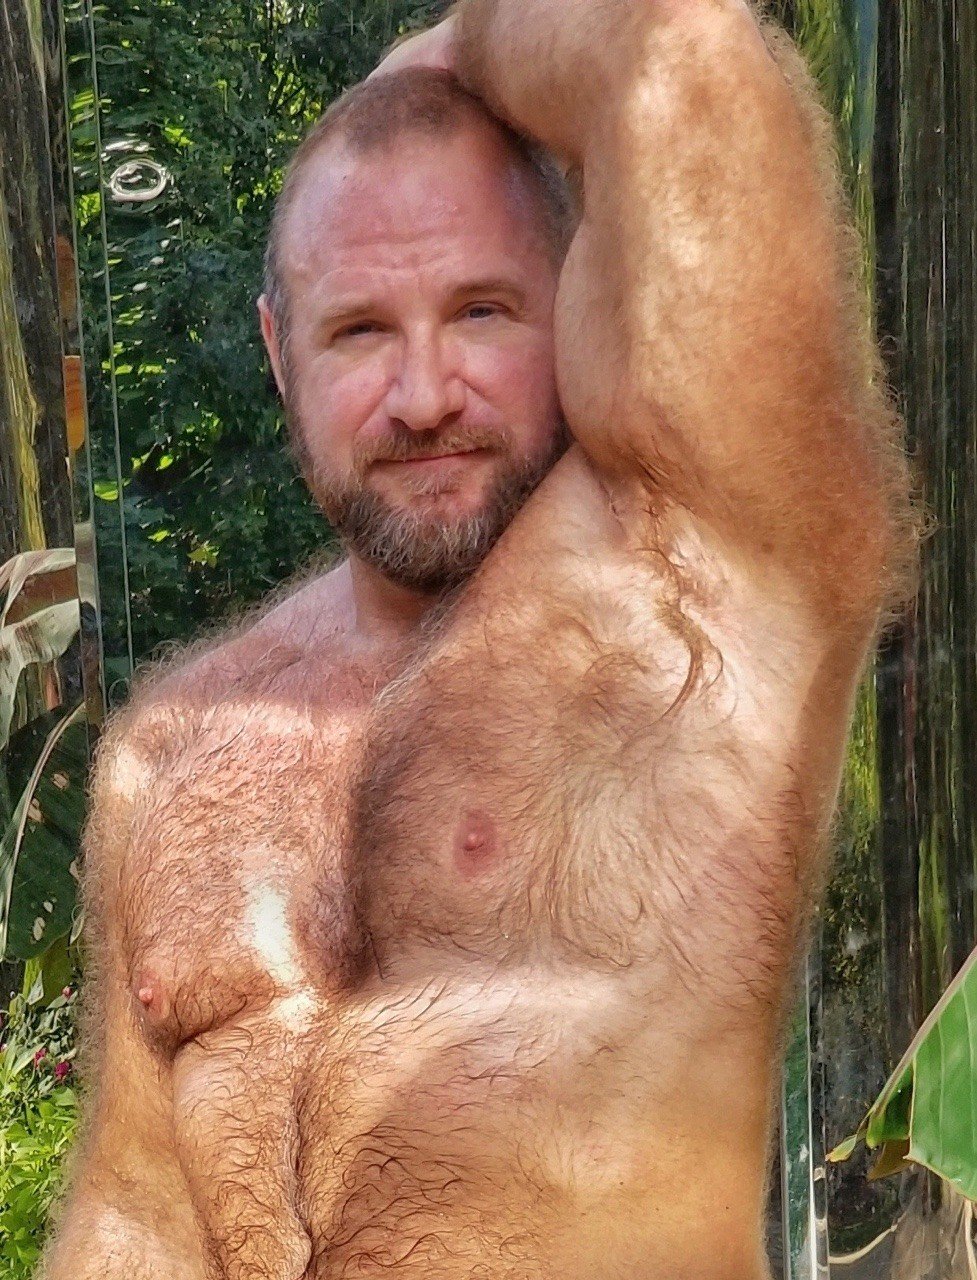 Photo by Smitty with the username @Resol702,  April 1, 2019 at 6:25 AM. The post is about the topic Gay Hairy Men